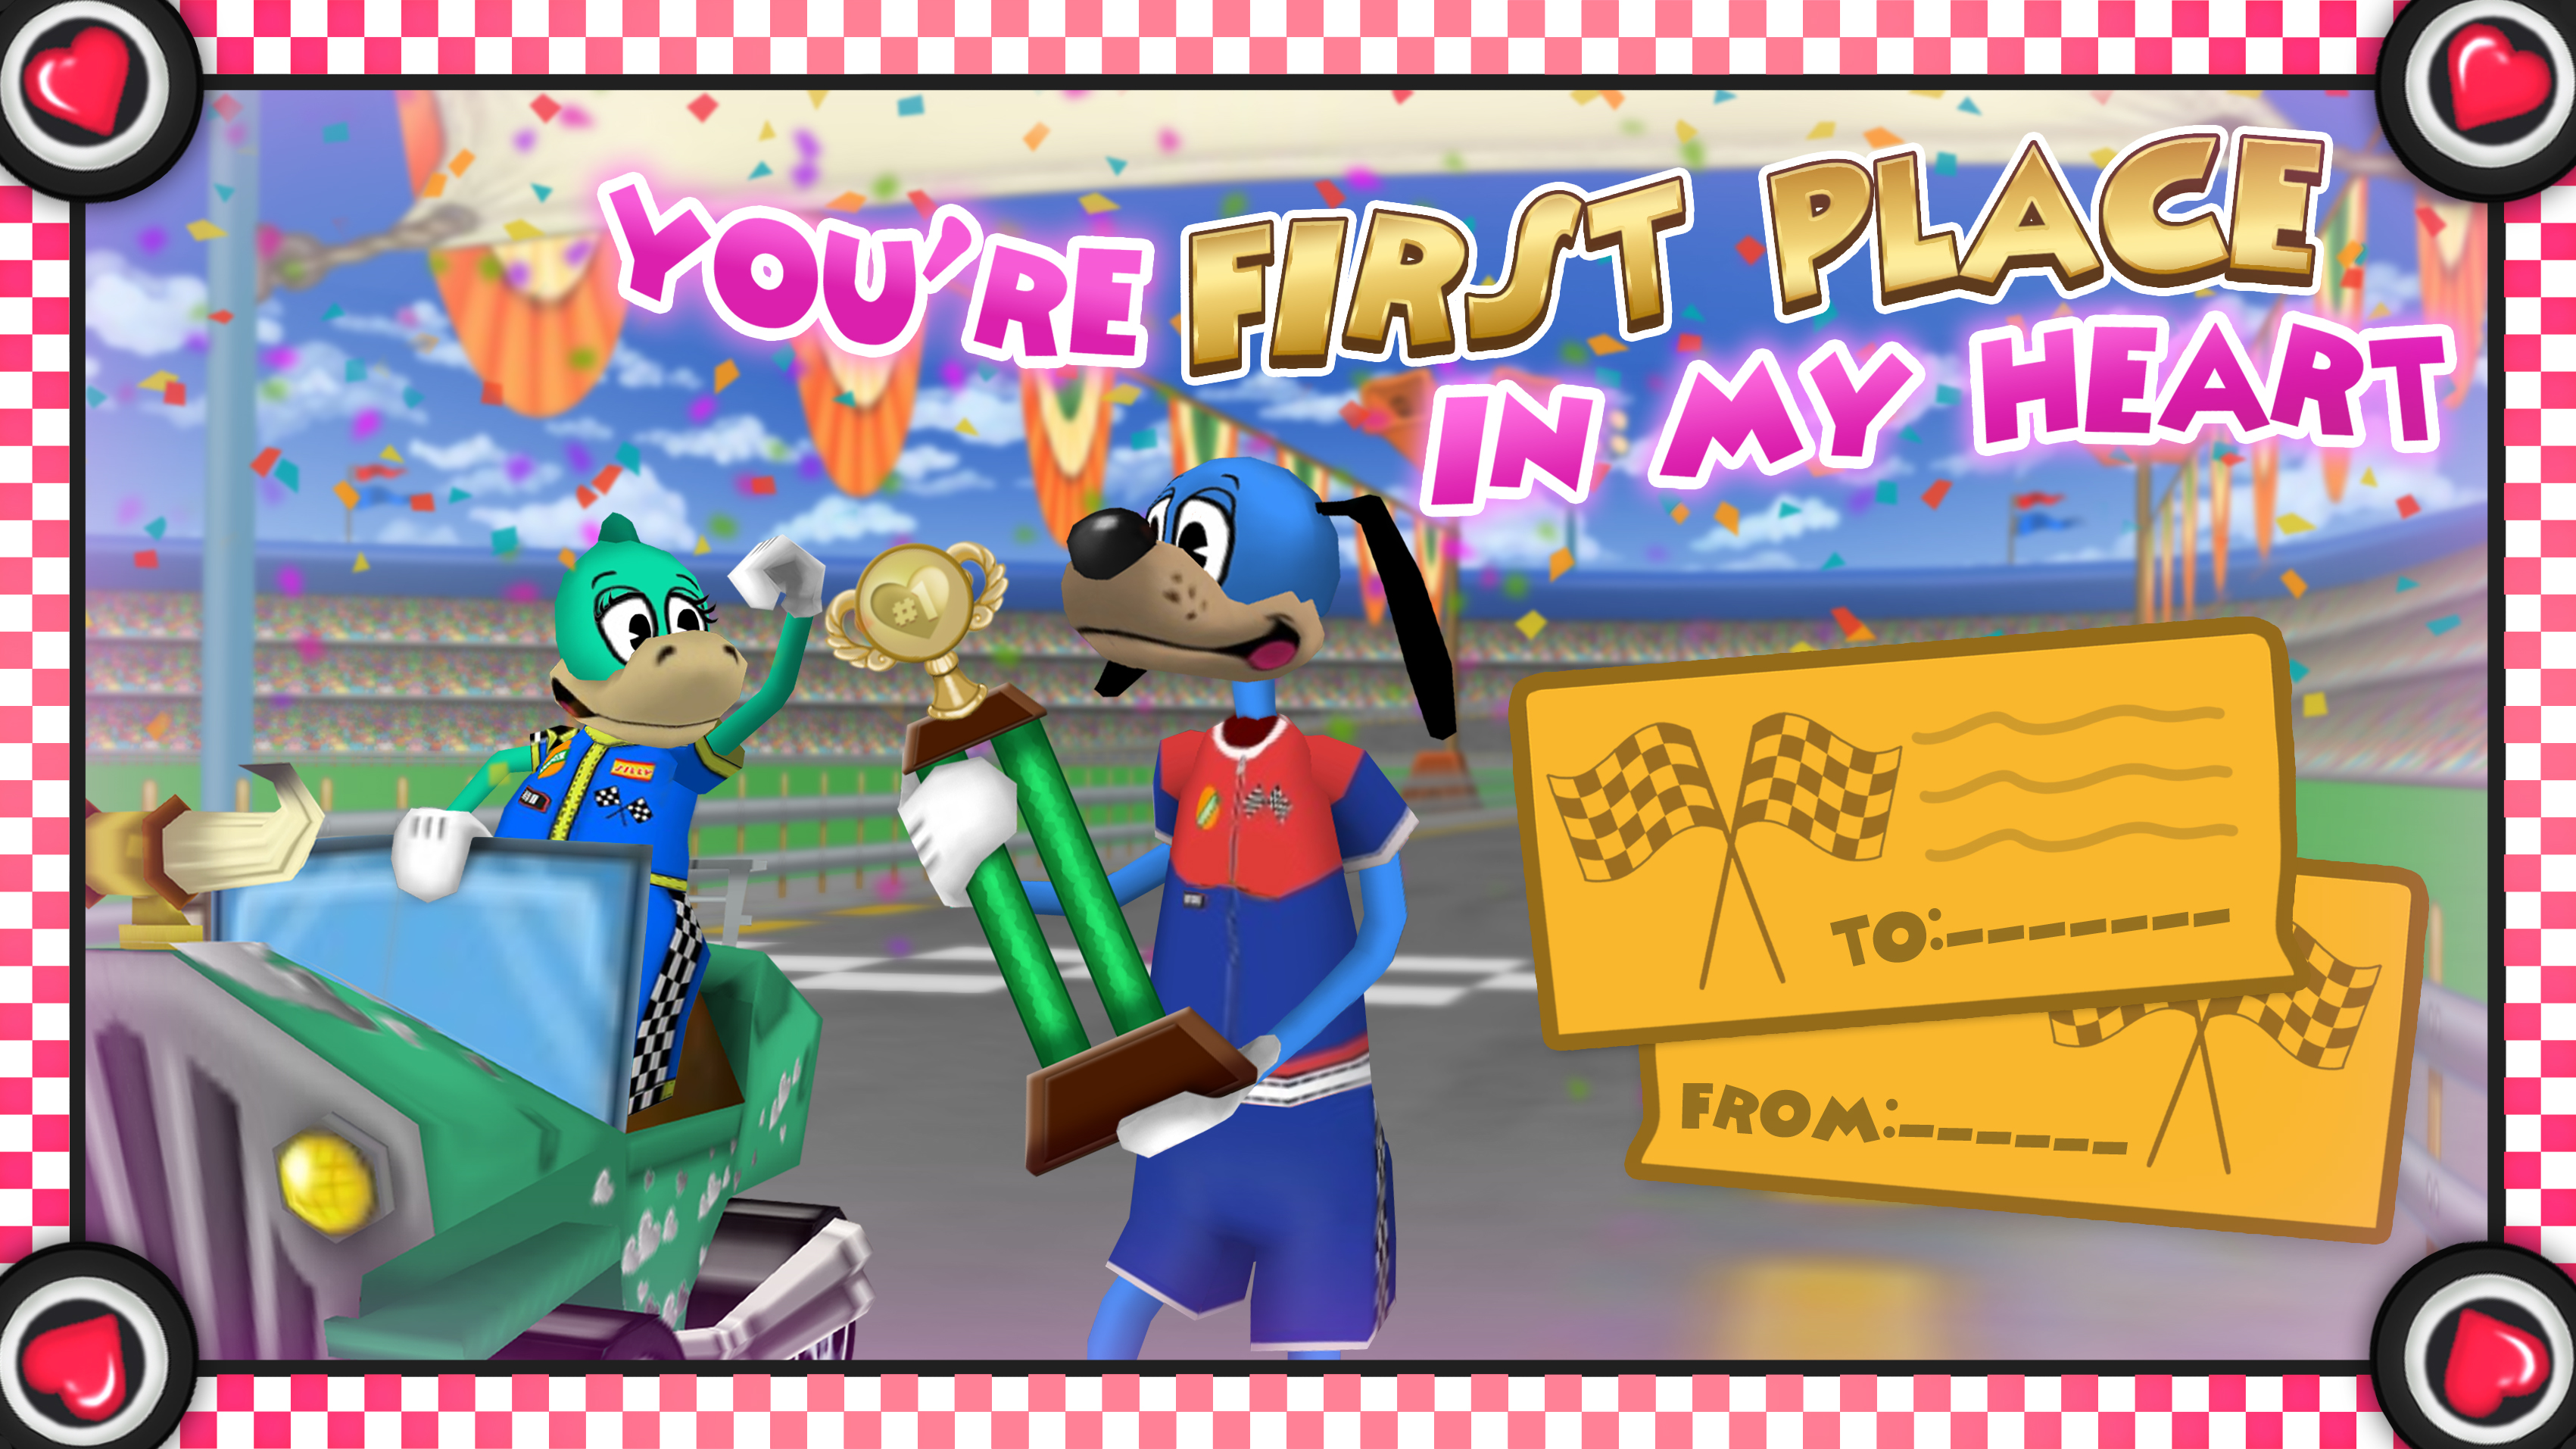 Racing ValenToon - You're first place in my heart!